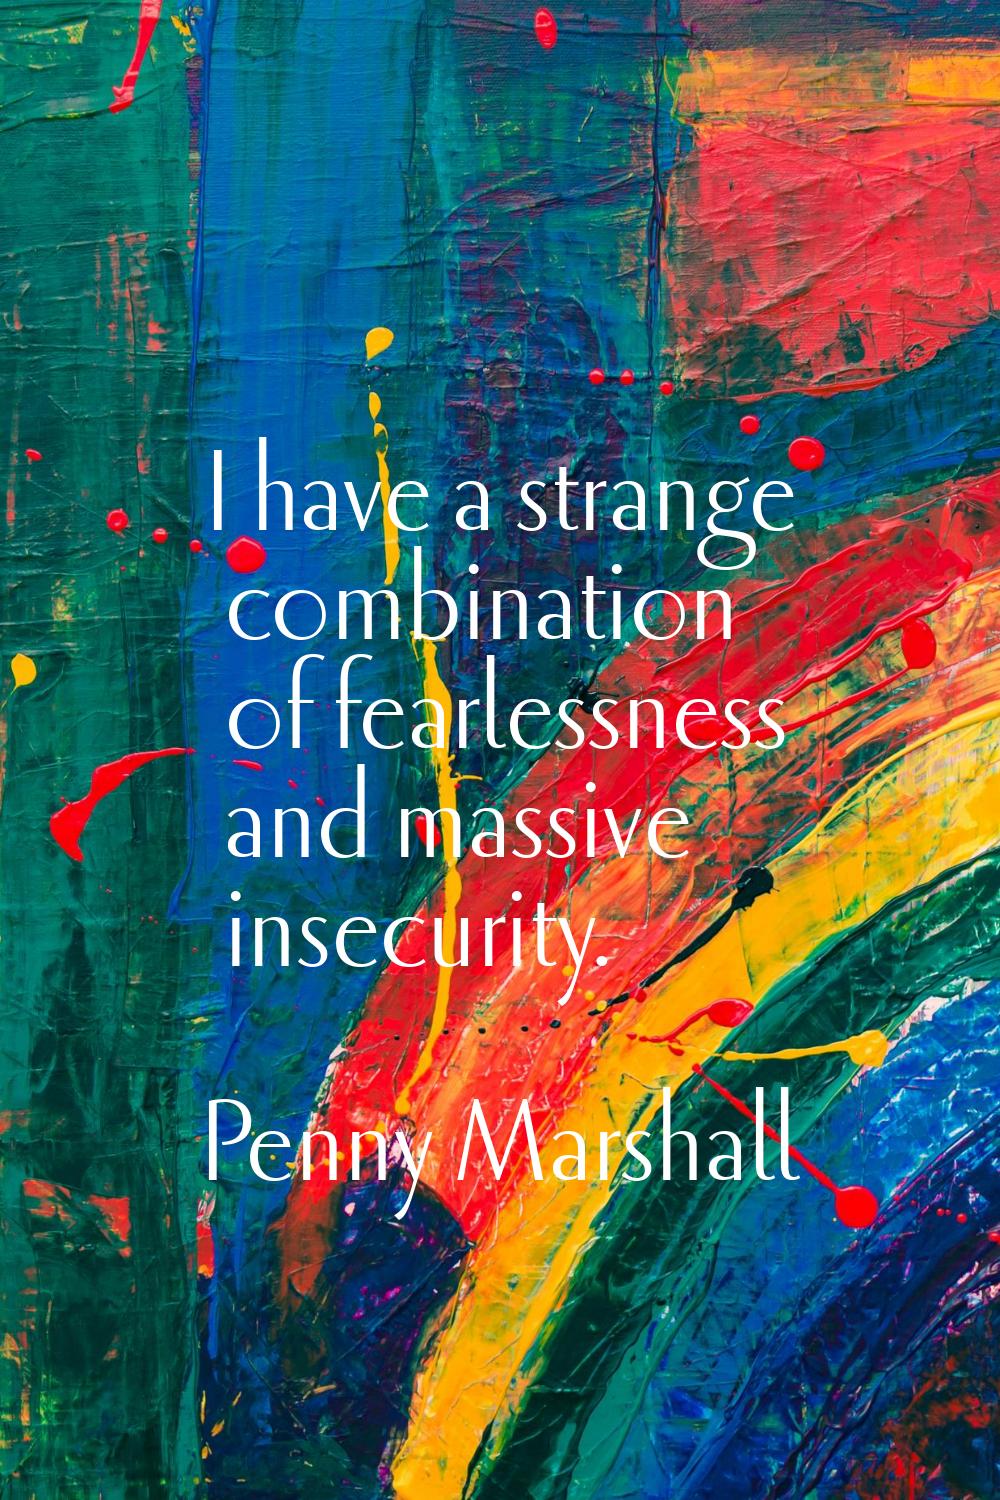 I have a strange combination of fearlessness and massive insecurity.